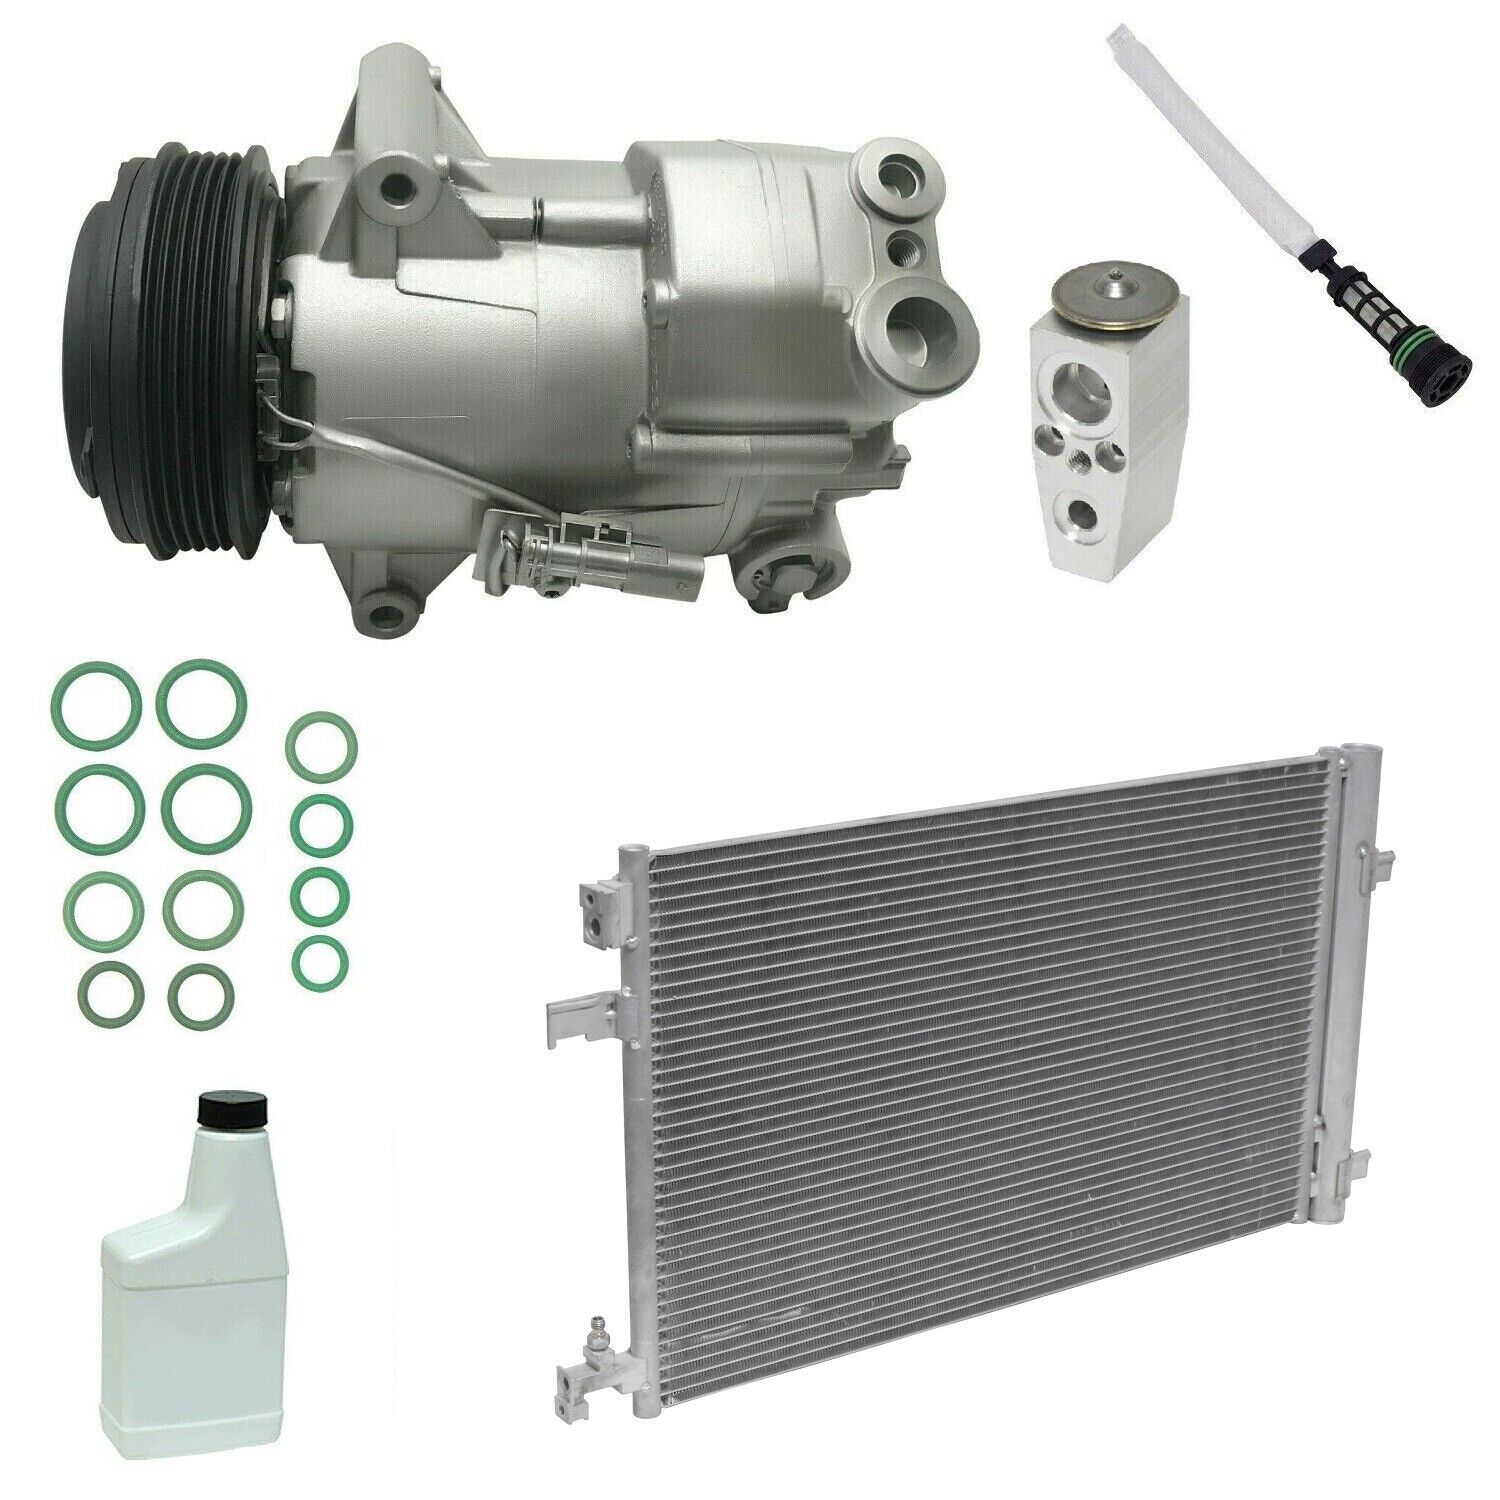 RYC Reman Complete AC Compressor Kit A015 (AEG273) With Condenser